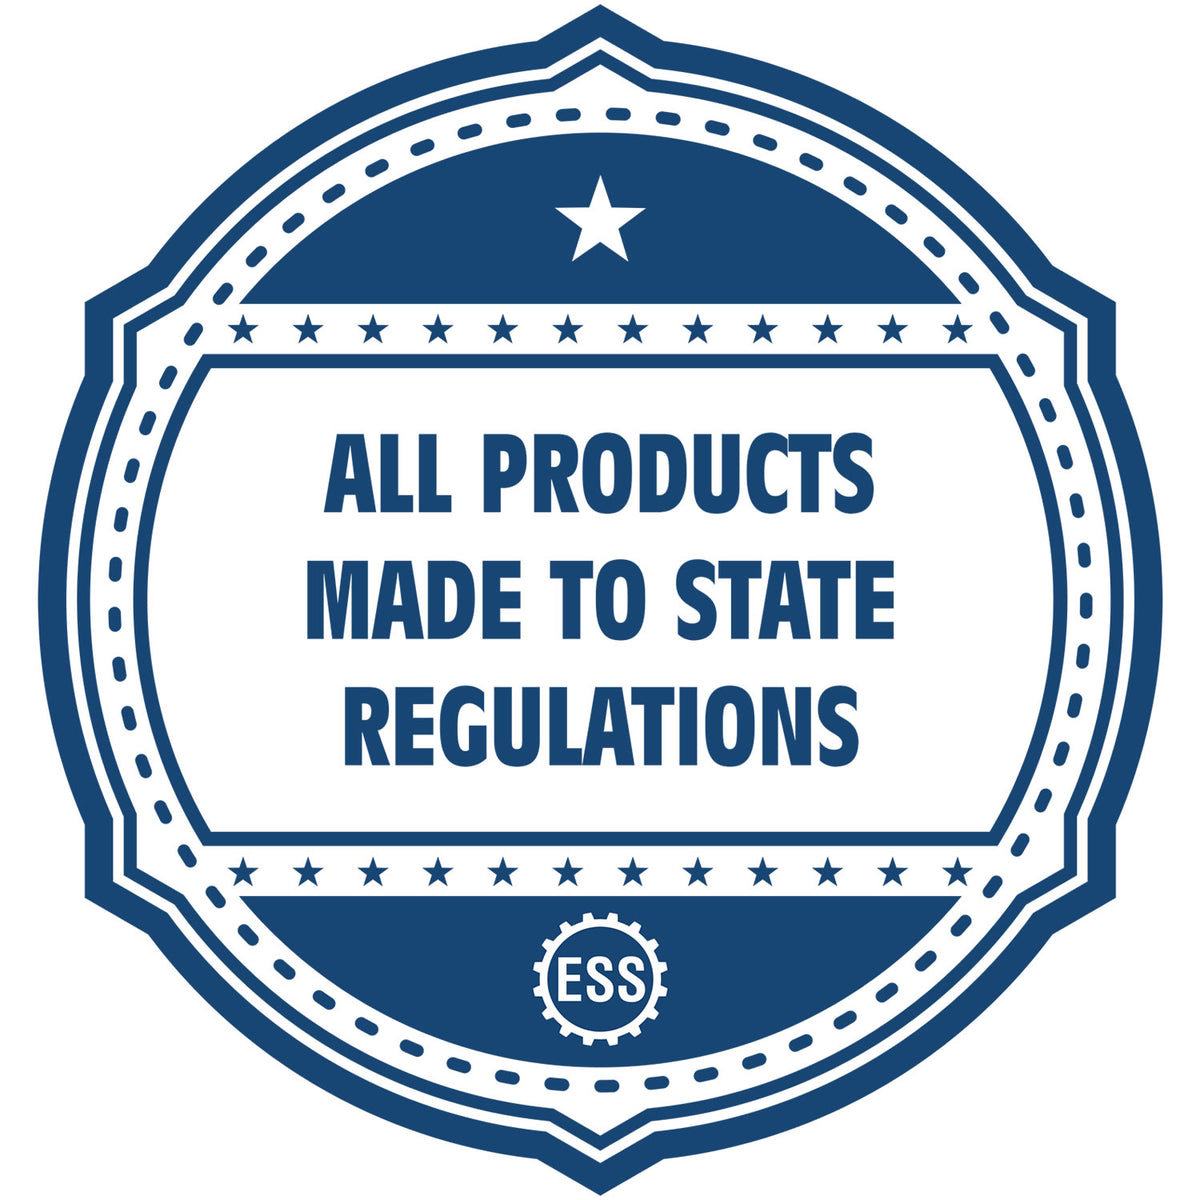 An icon or badge element for the Long Reach Washington PE Seal showing that this product is made in compliance with state regulations.